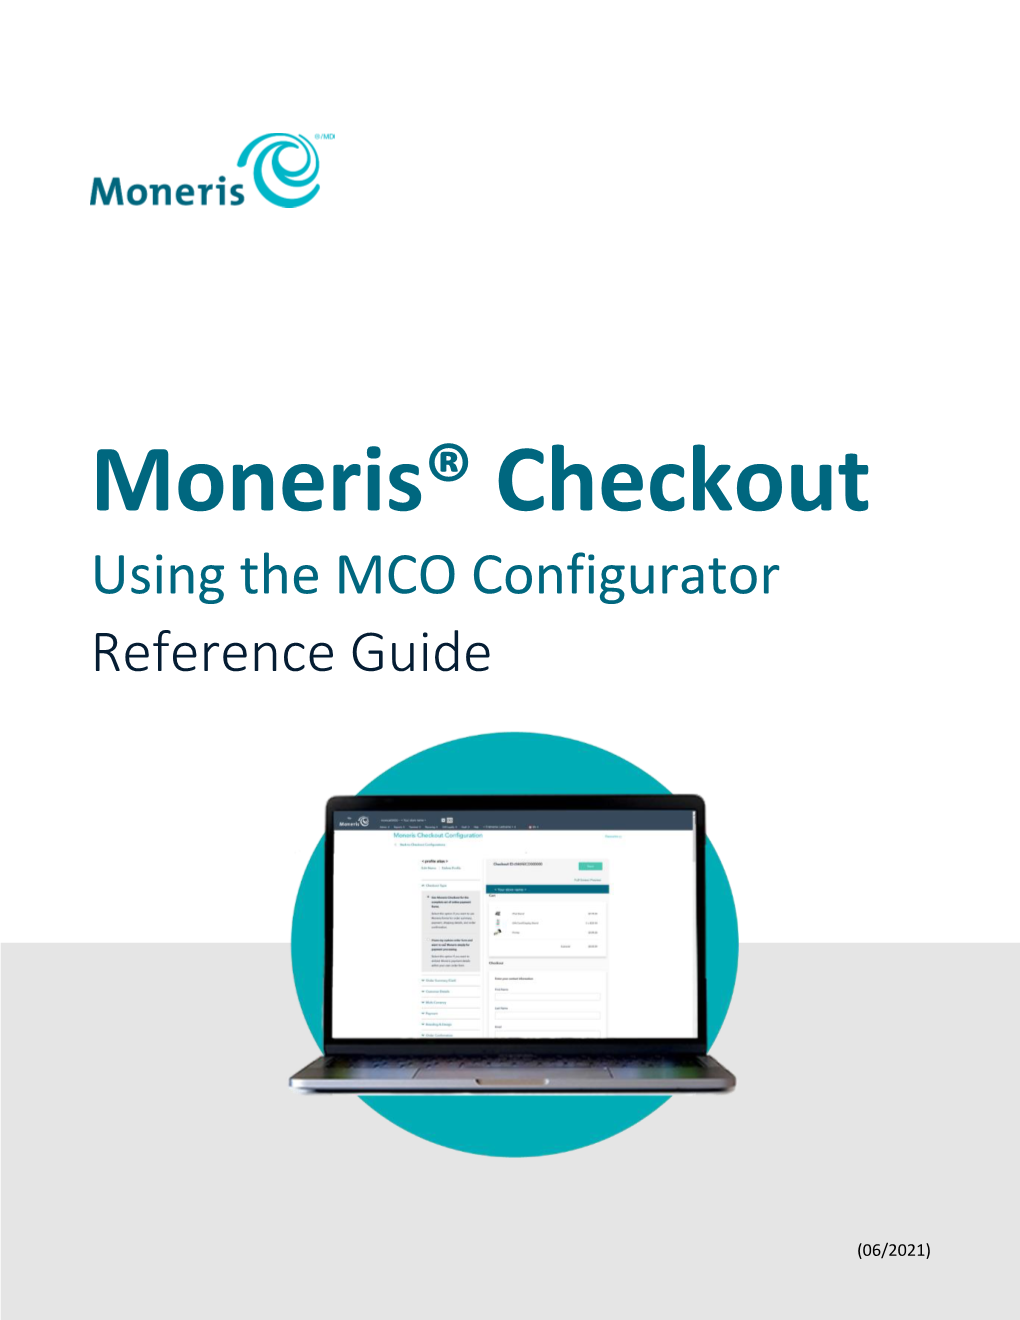 Moneris Checkout Using the MCO Configurator Reference Guide